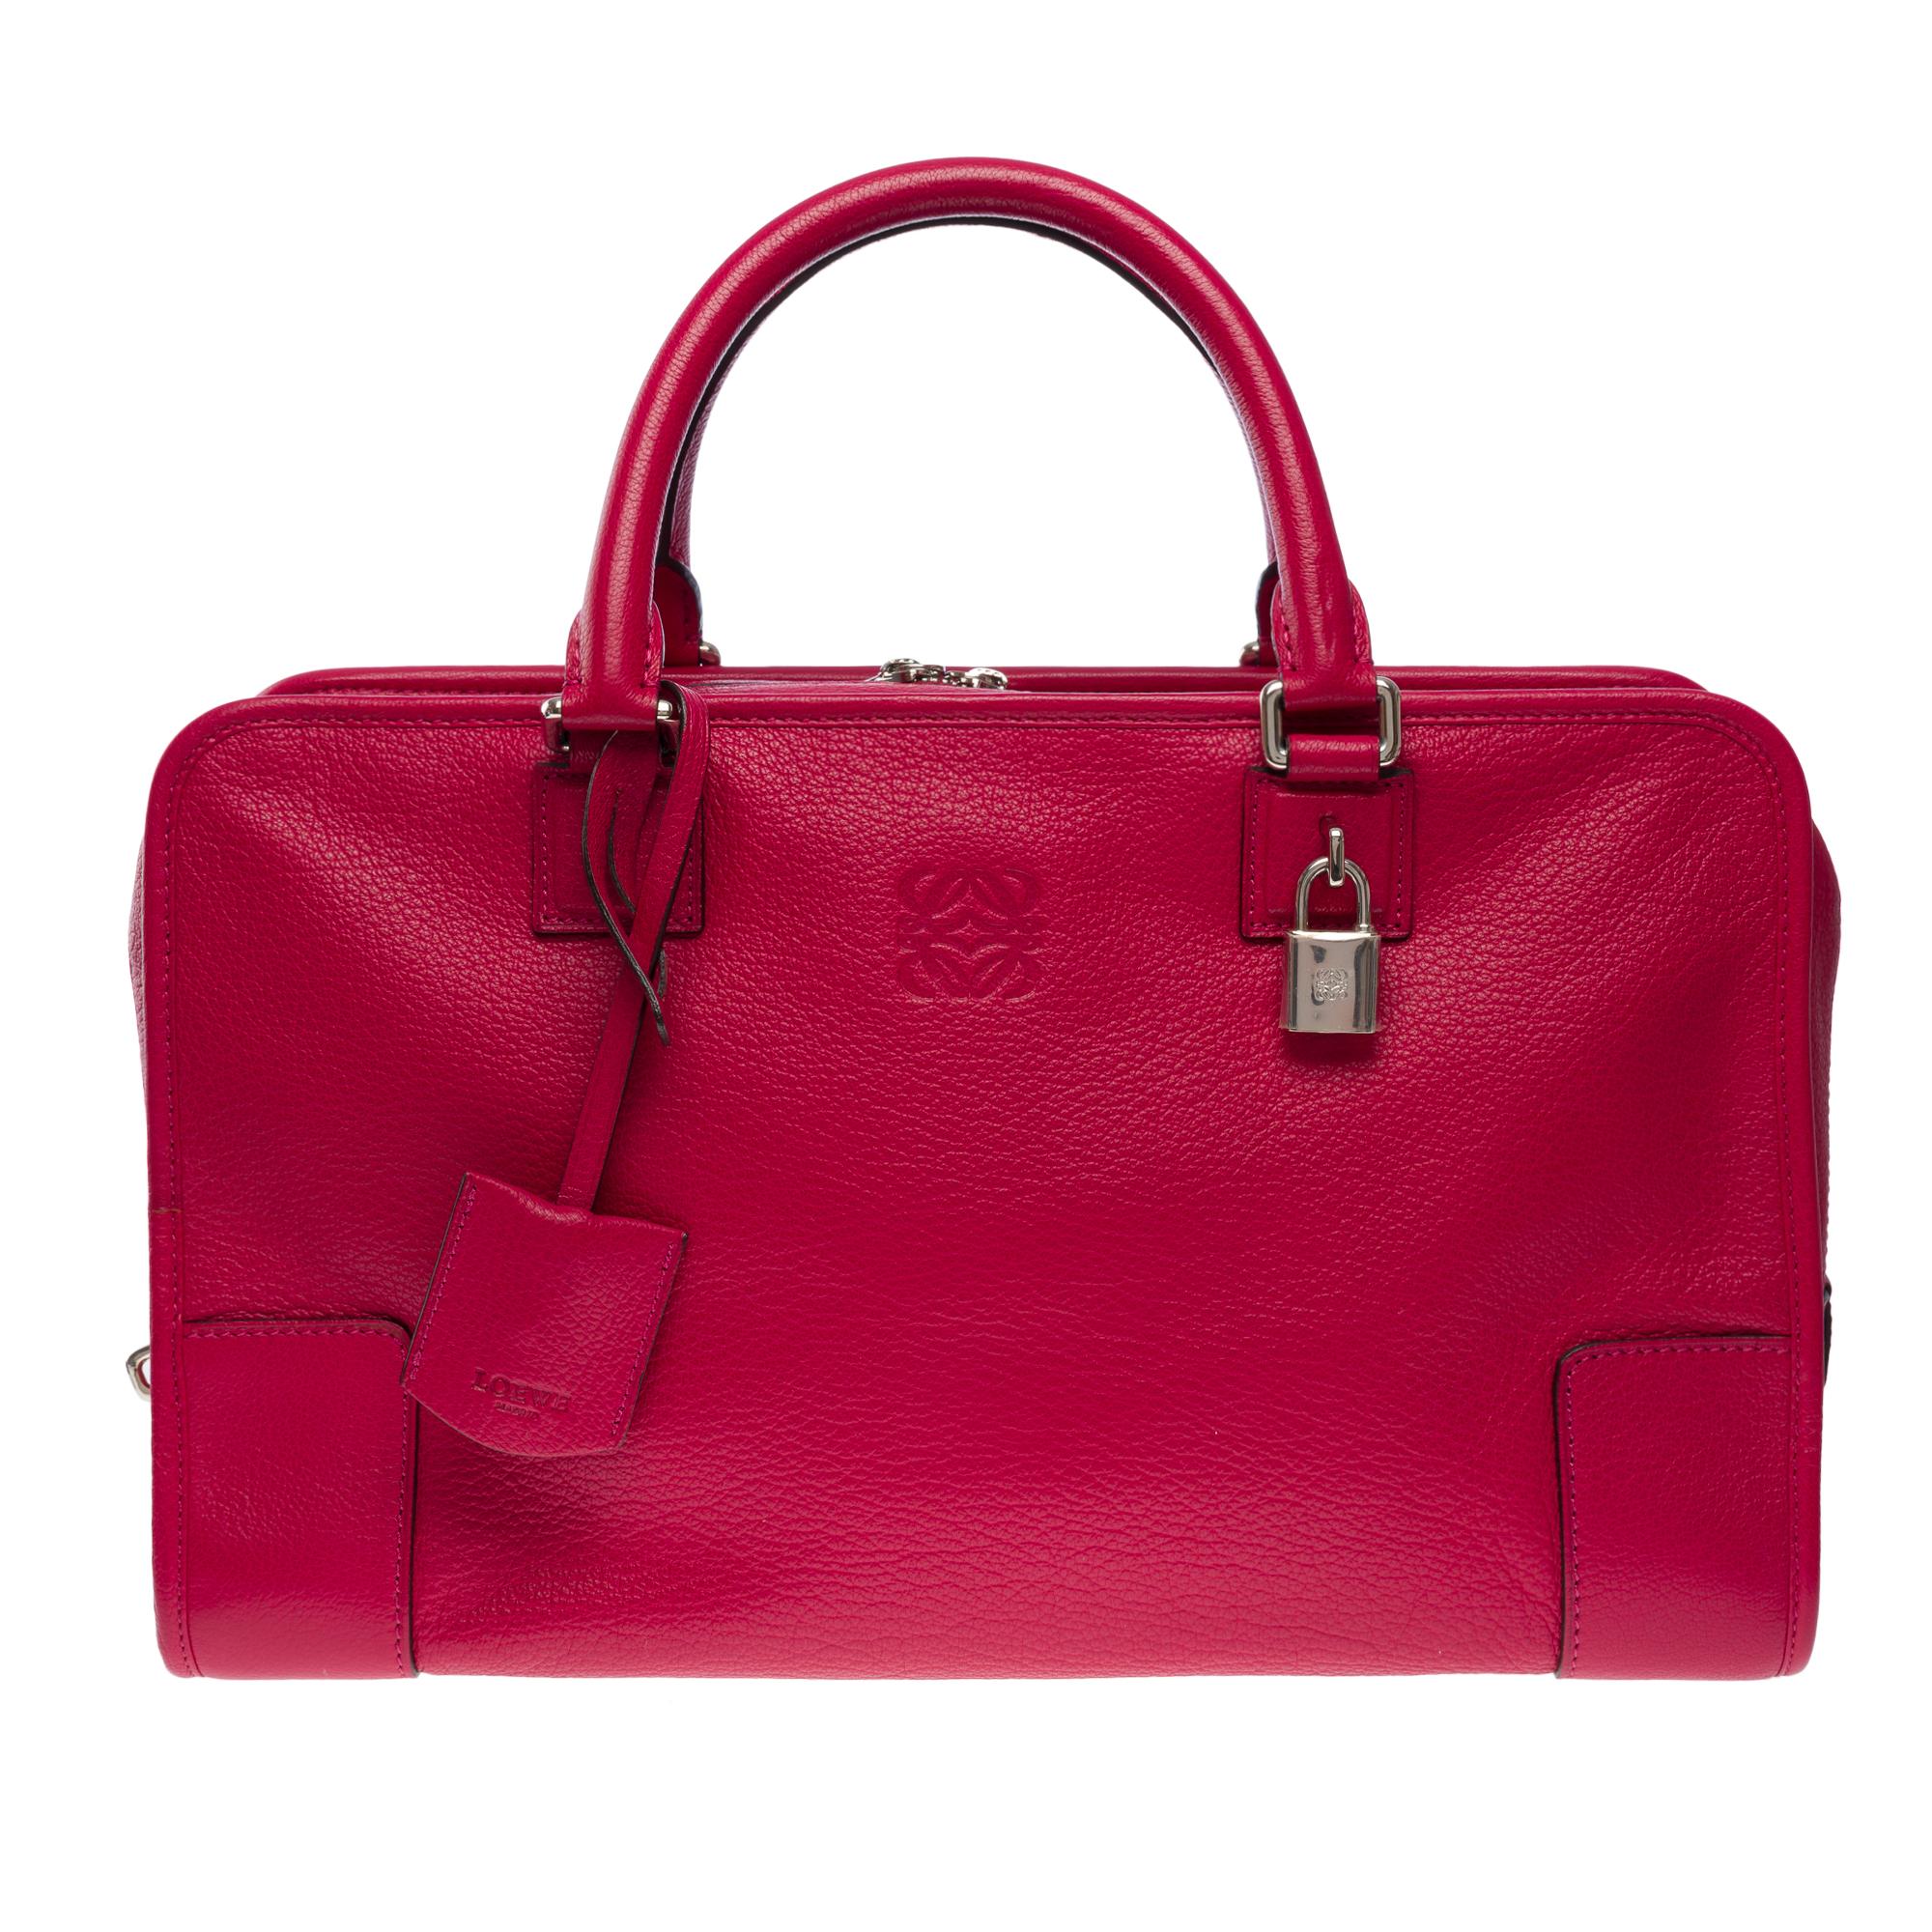 Delightful Loewe Amazona 36 (GM) handbag in red leather, SHW In Excellent Condition For Sale In Paris, IDF